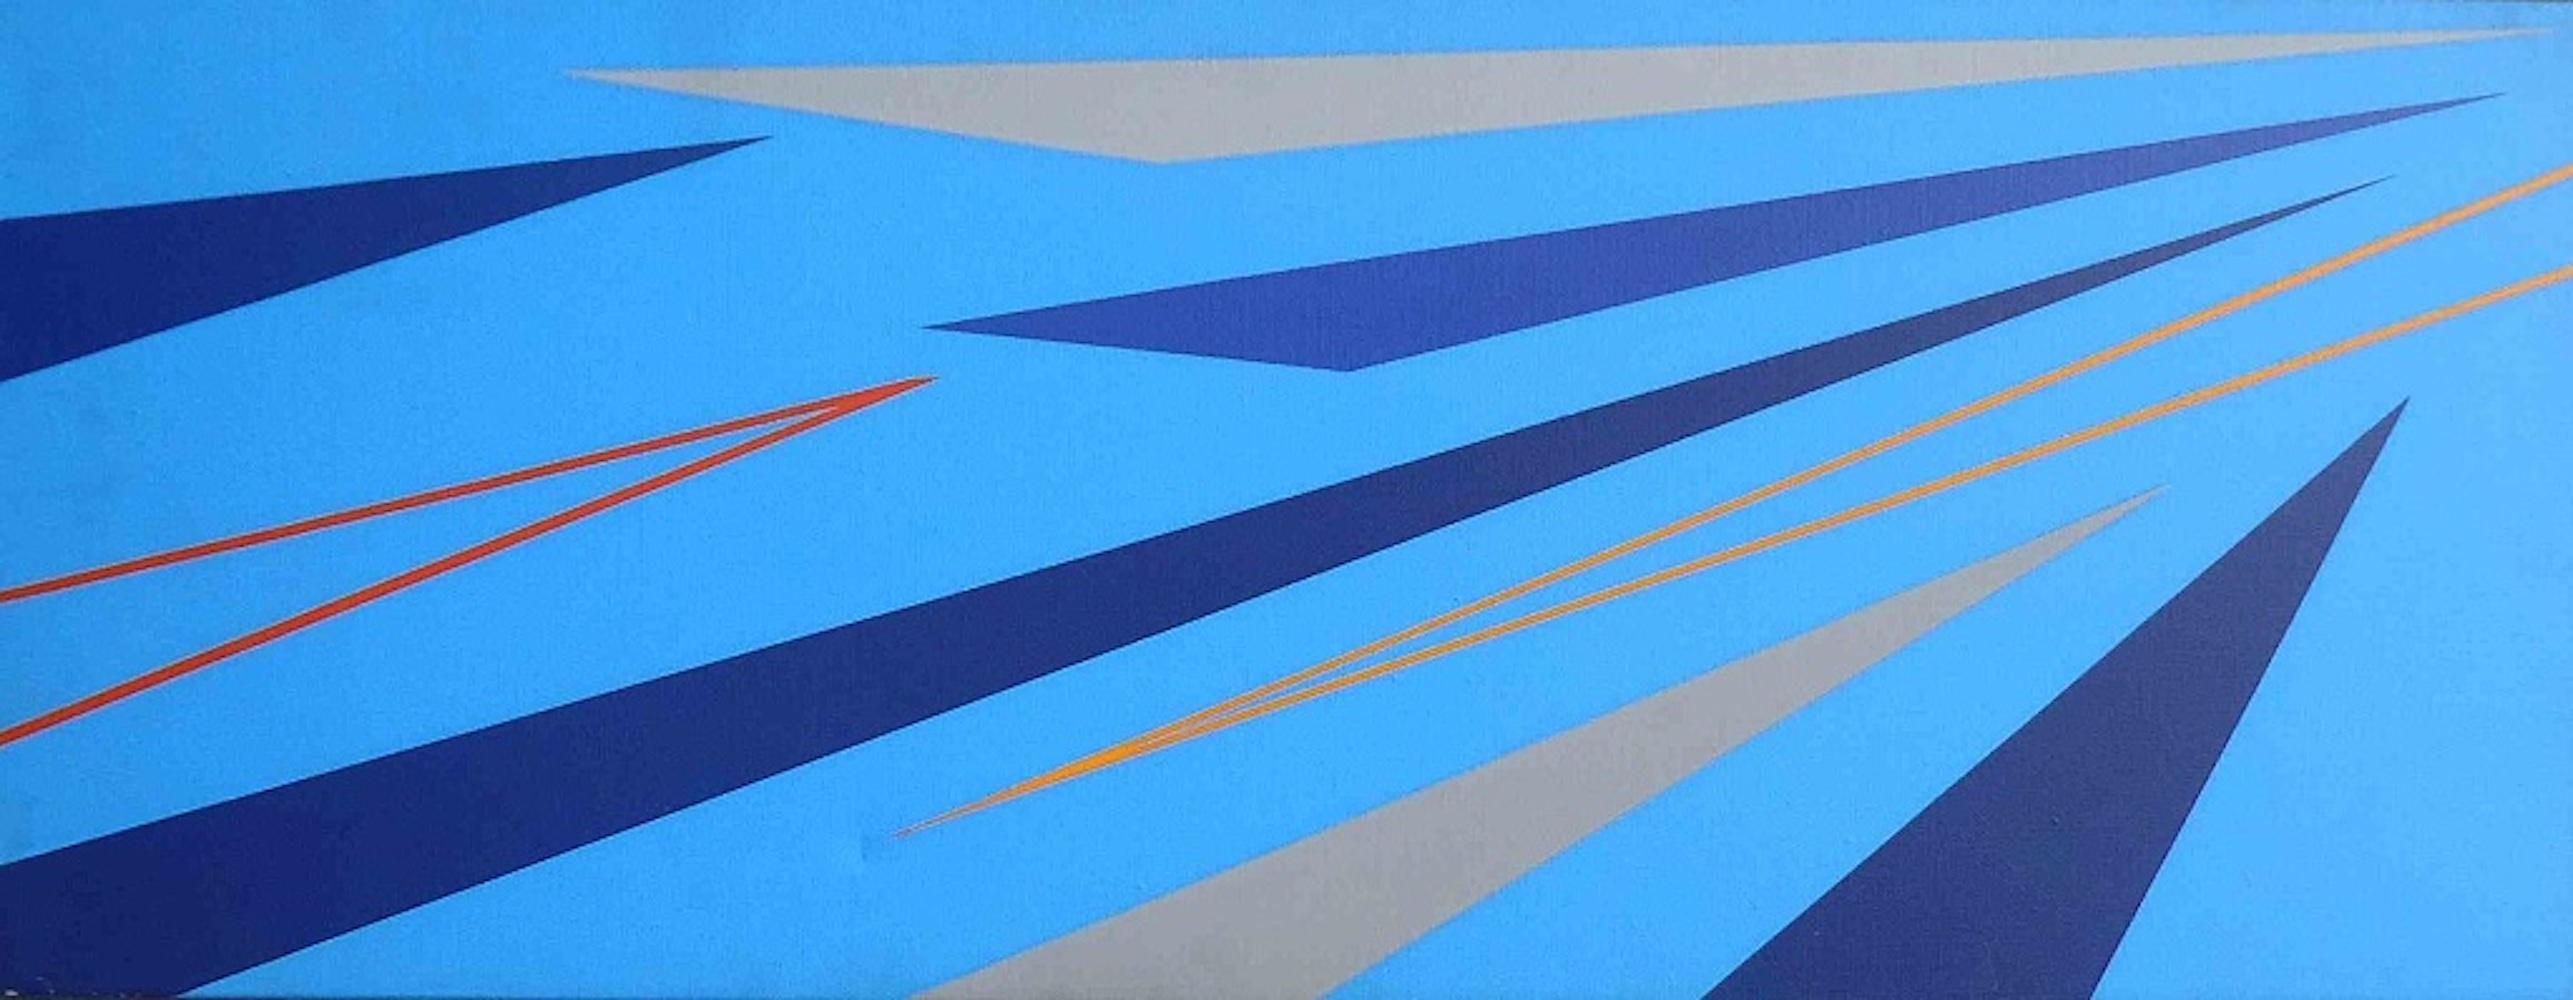 Blue Composition - Oil on Canvas by Marcello Grottesi - 1977 For Sale 1